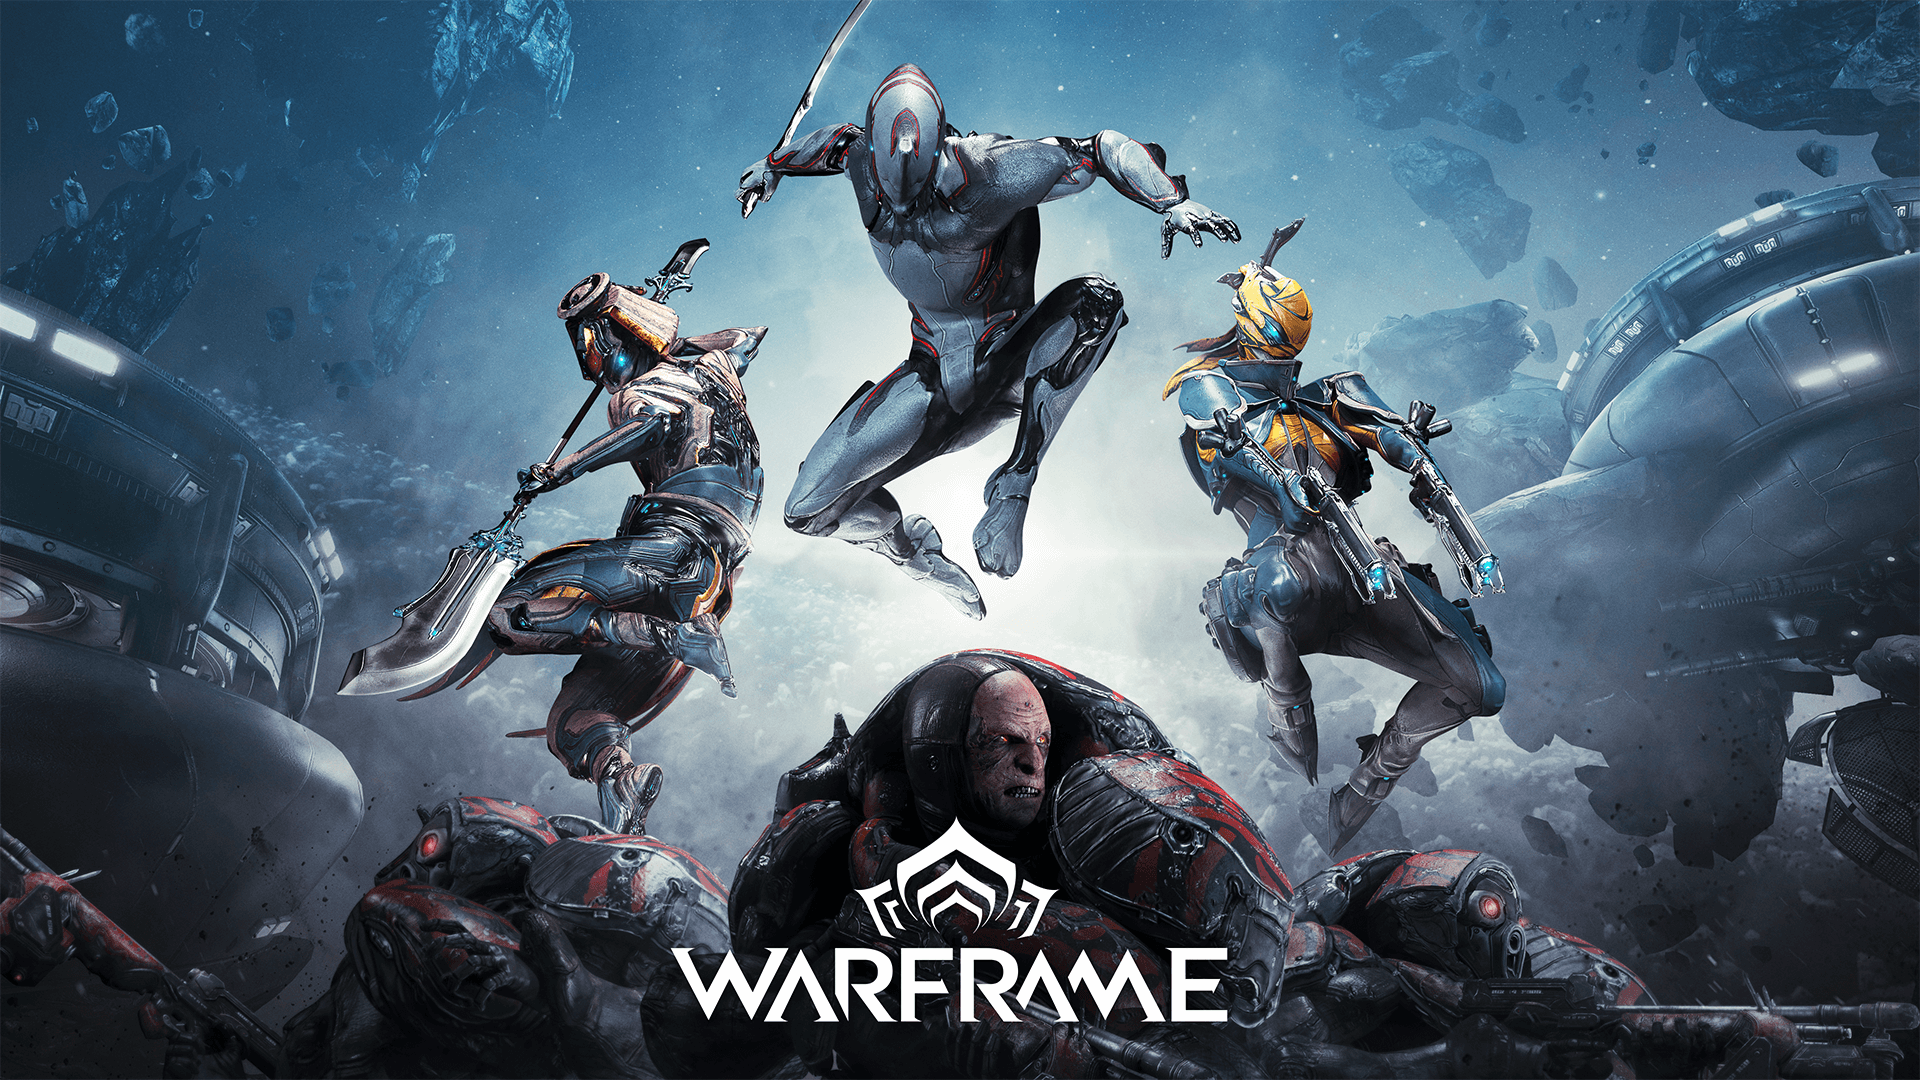 Image for Warframe will get cross-play and cross-save later this year